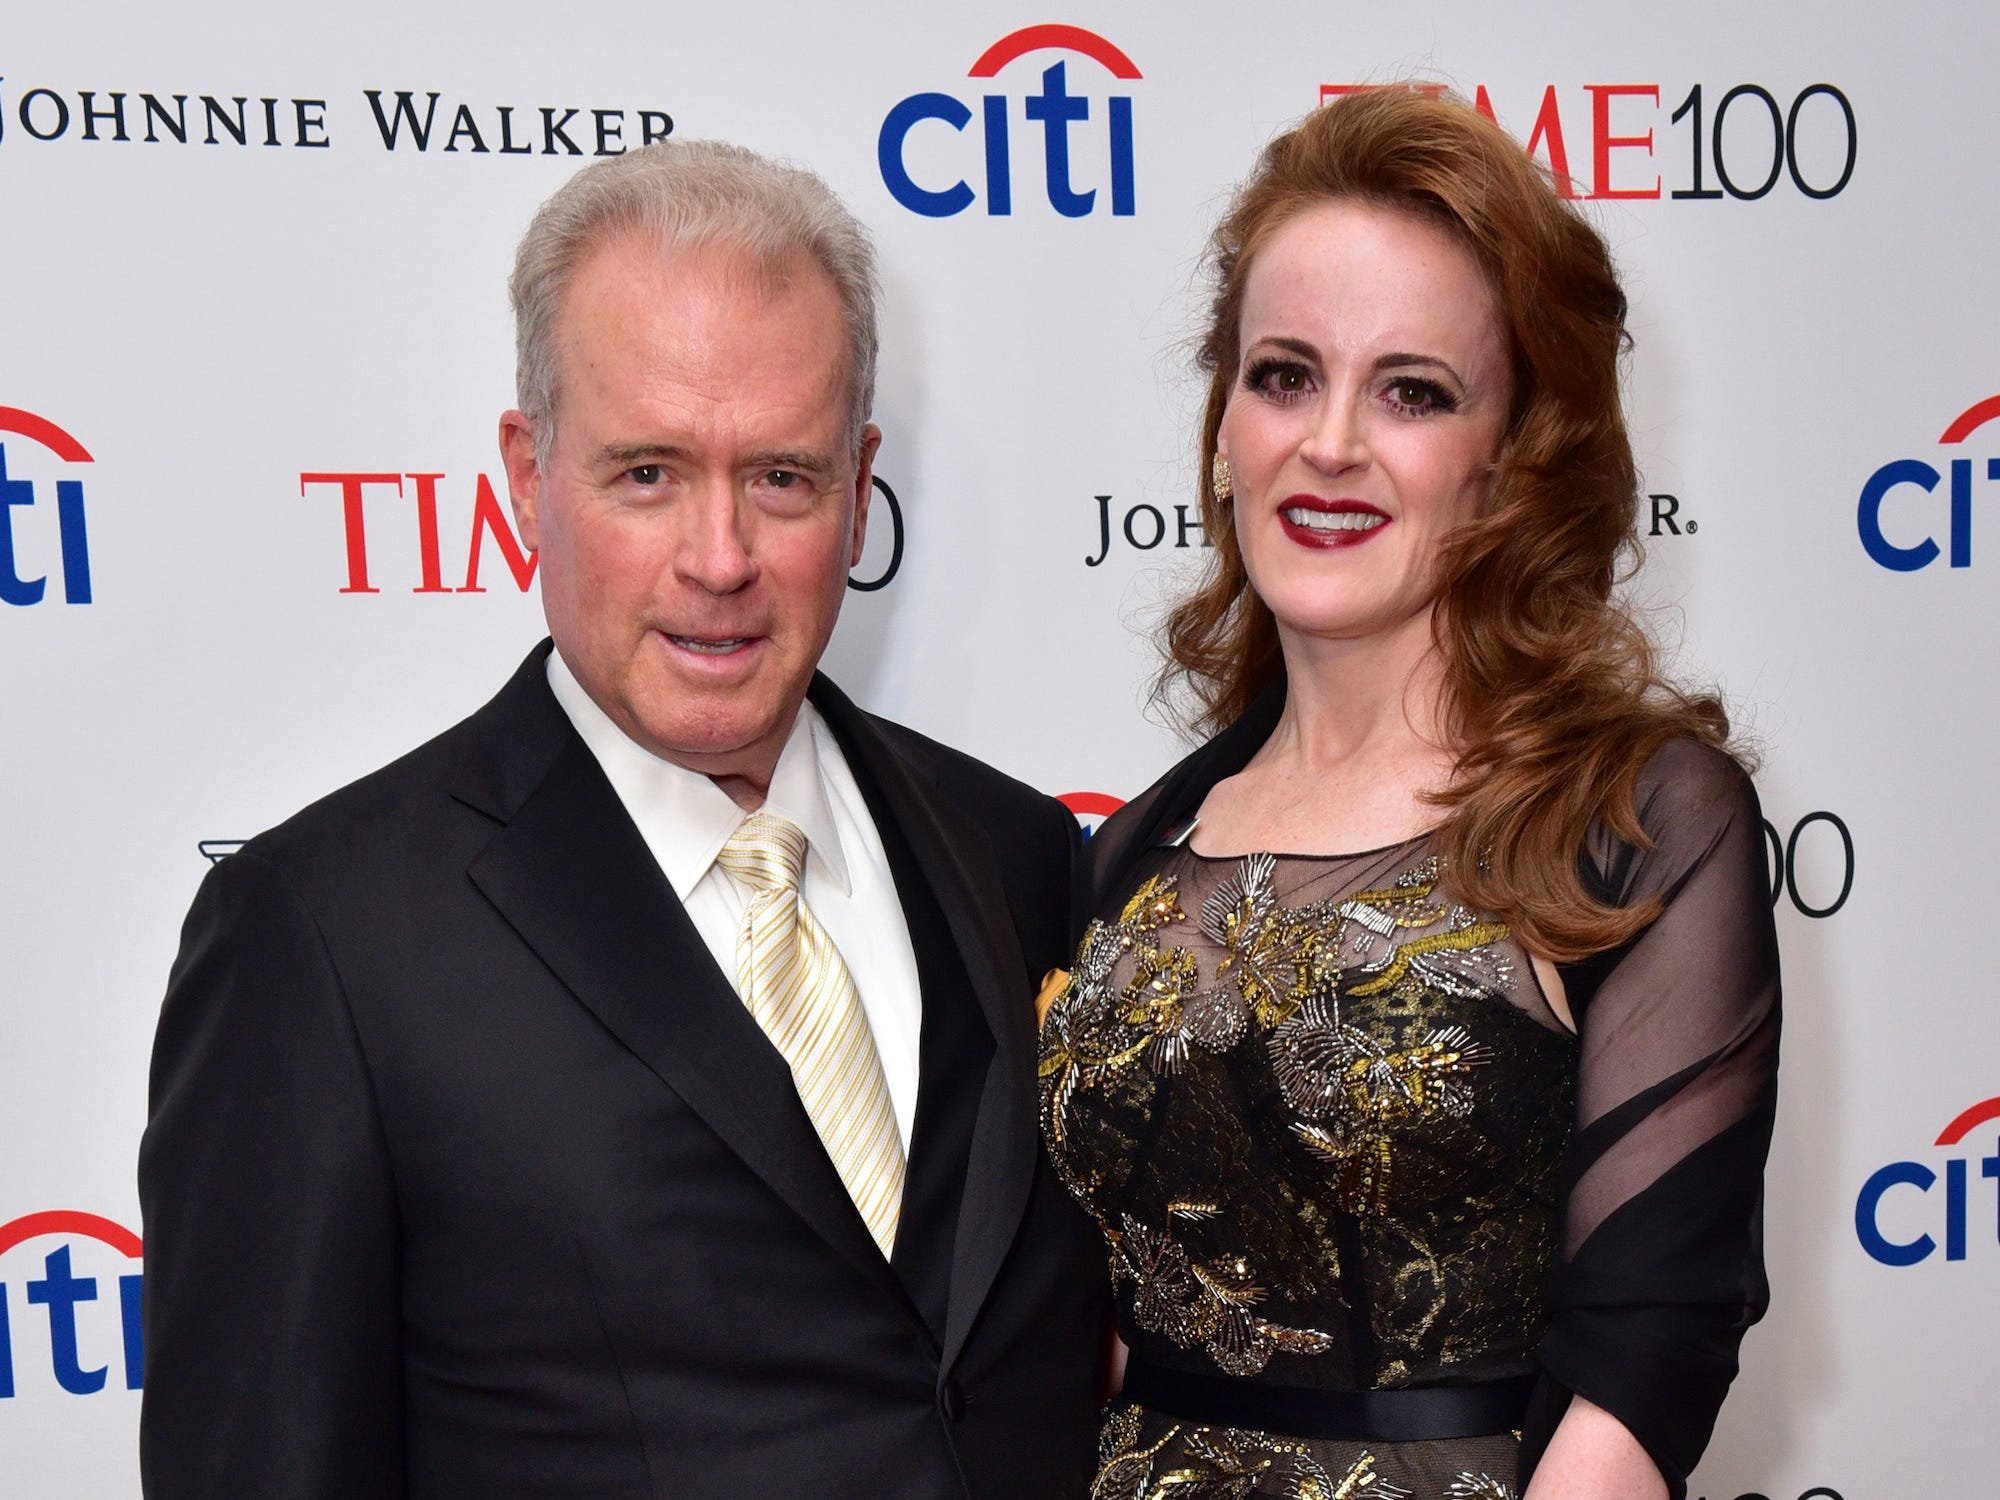 <p><a href="https://www.businessinsider.com/inside-the-life-and-career-robert-mercer-trump-mega-donor-2020-7">Robert Mercer</a>, a former hedge fund CEO, has given $814,399 to the Trump 47 Committee.</p><p>Both Robert and his daughter Rebekah have been major contributors to pro-Trump and more anti-establishment conservative causes, including helping to fund the right-wing Breitbart website and the <a href="https://www.businessinsider.com/rebekah-mercer-funds-parler-social-media-app-touted-by-right-2020-11">conservative social media app Parler</a>.</p>